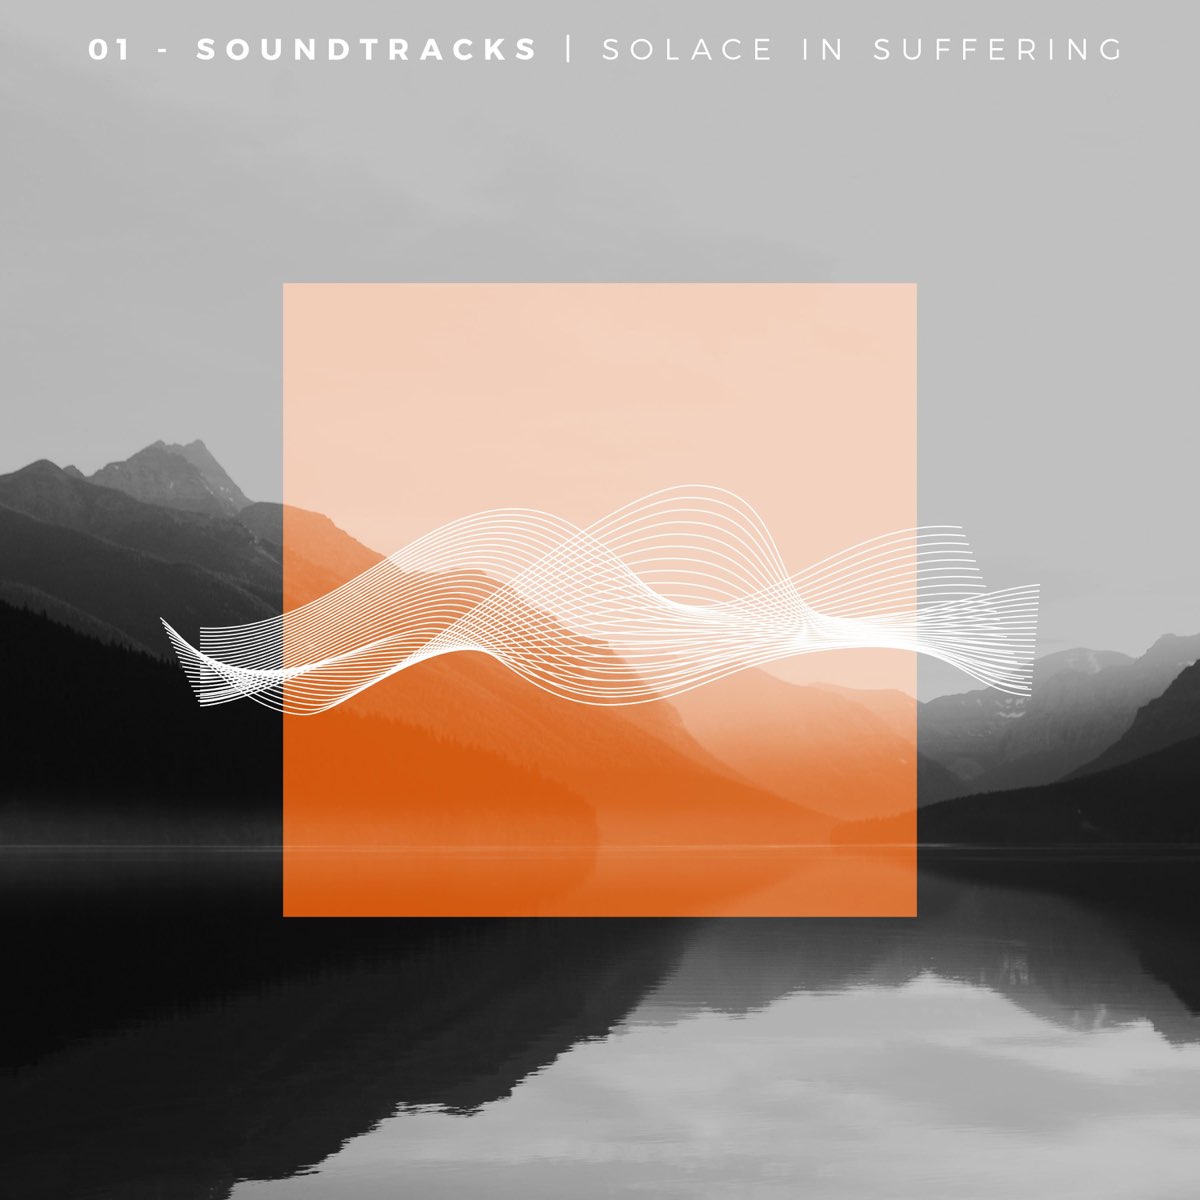 Ready go to ... https://music.apple.com/us/album/01-soundtracks-solace-in-suffering/1676854332 [ 01 - Soundtracks  Solace in Suffering by LCBC Worship on Apple Music]